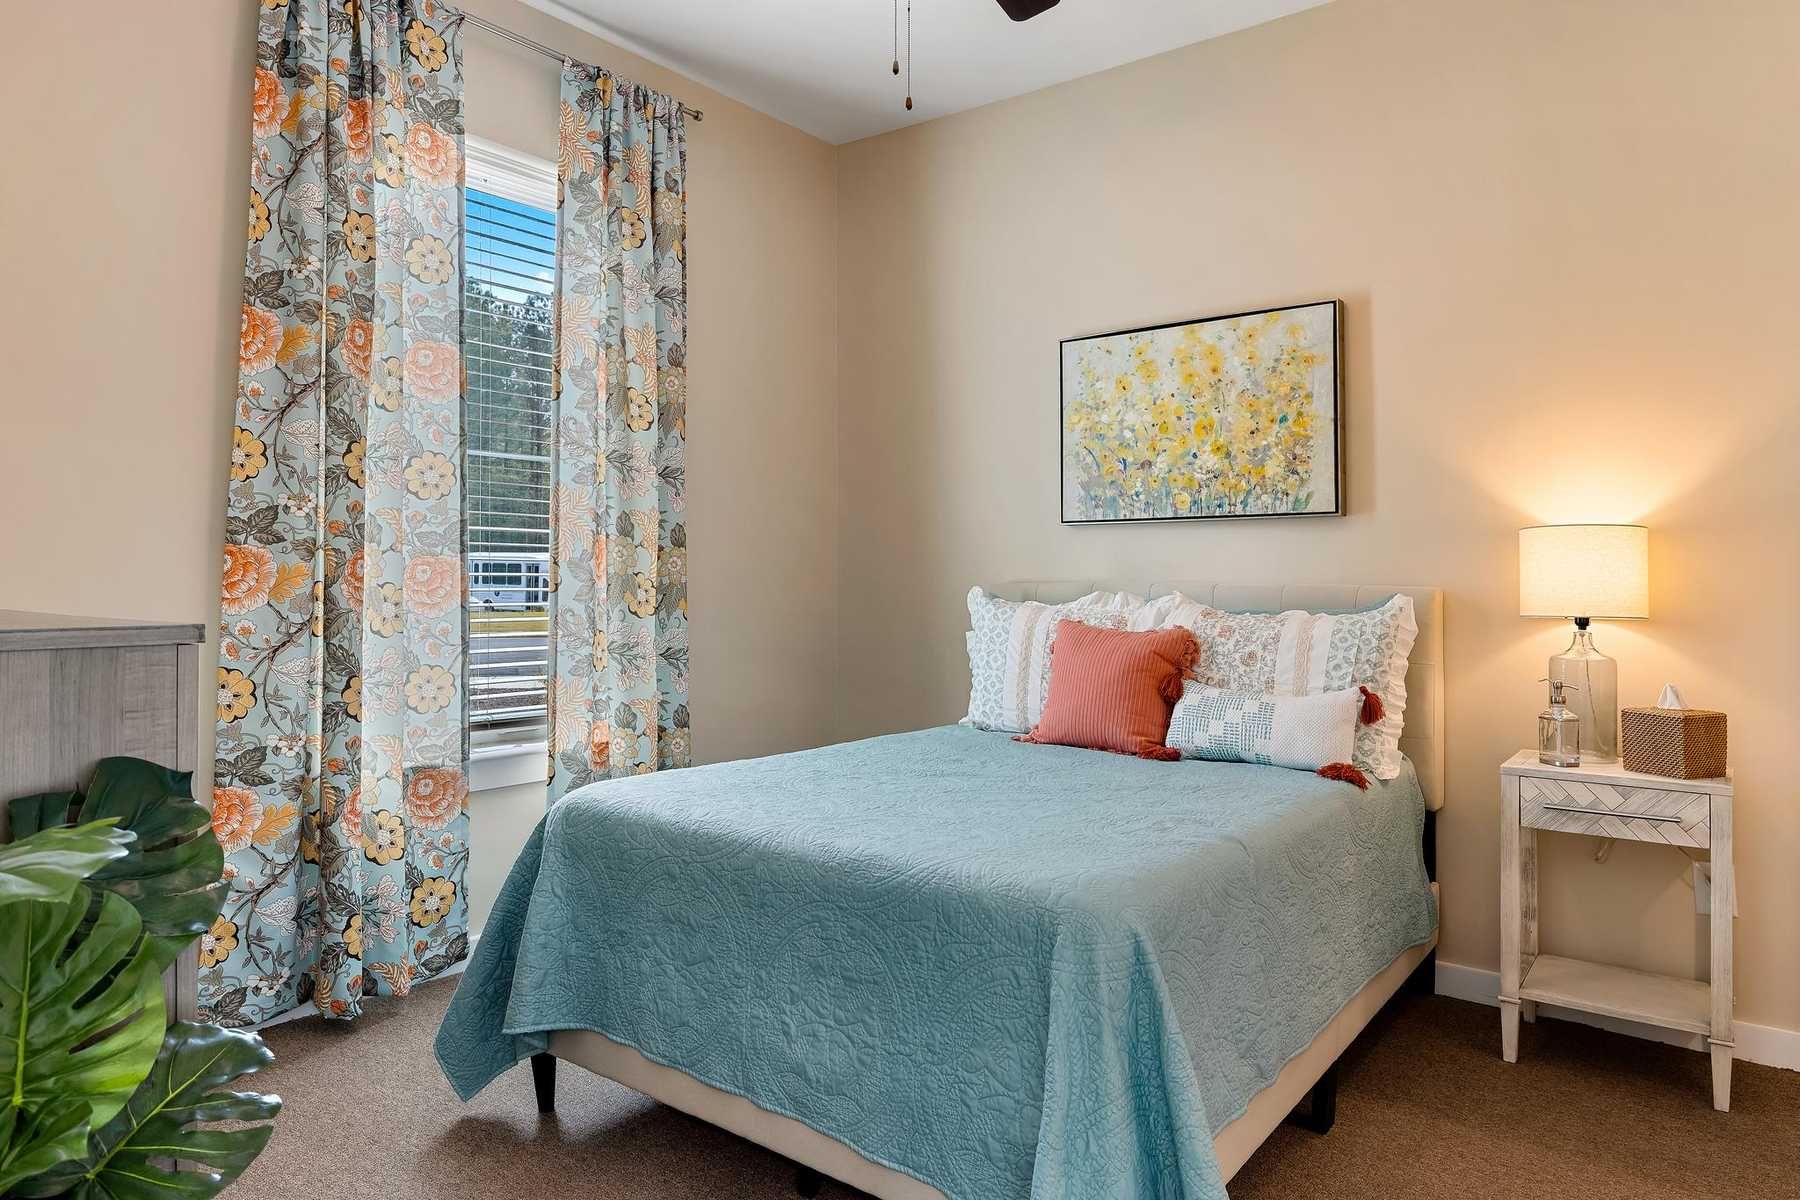 The Claiborne at Newnan Lakes assisted living residence bedroom